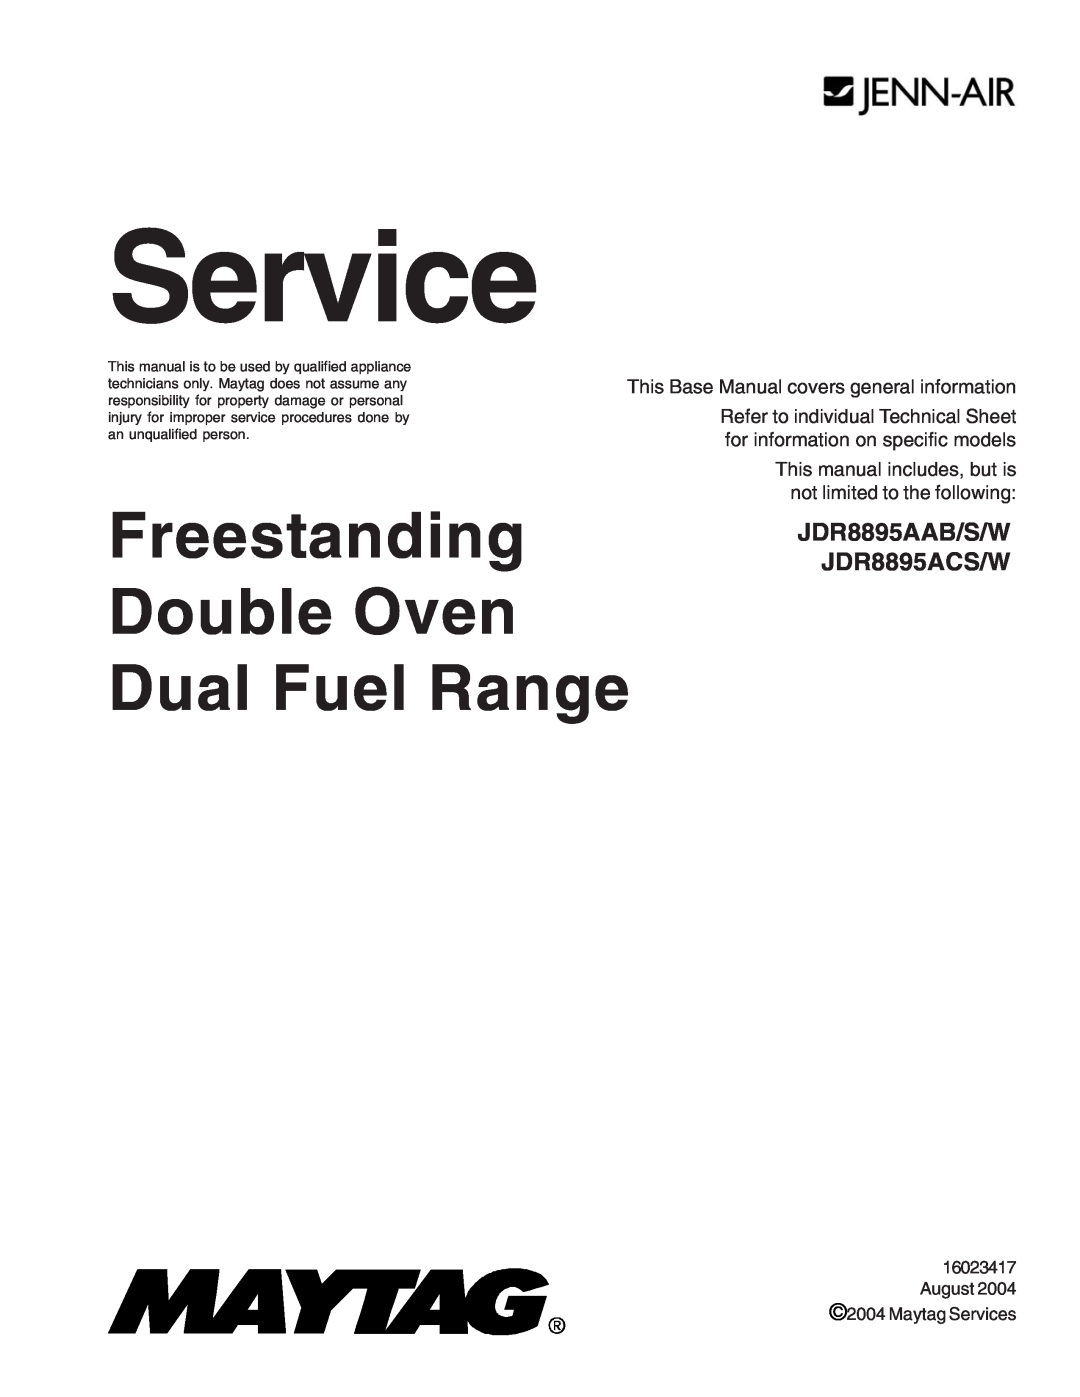 Jenn-Air manual Service, JDR8895AAB/S/W JDR8895ACS/W, Freestanding Double Oven Dual Fuel Range 